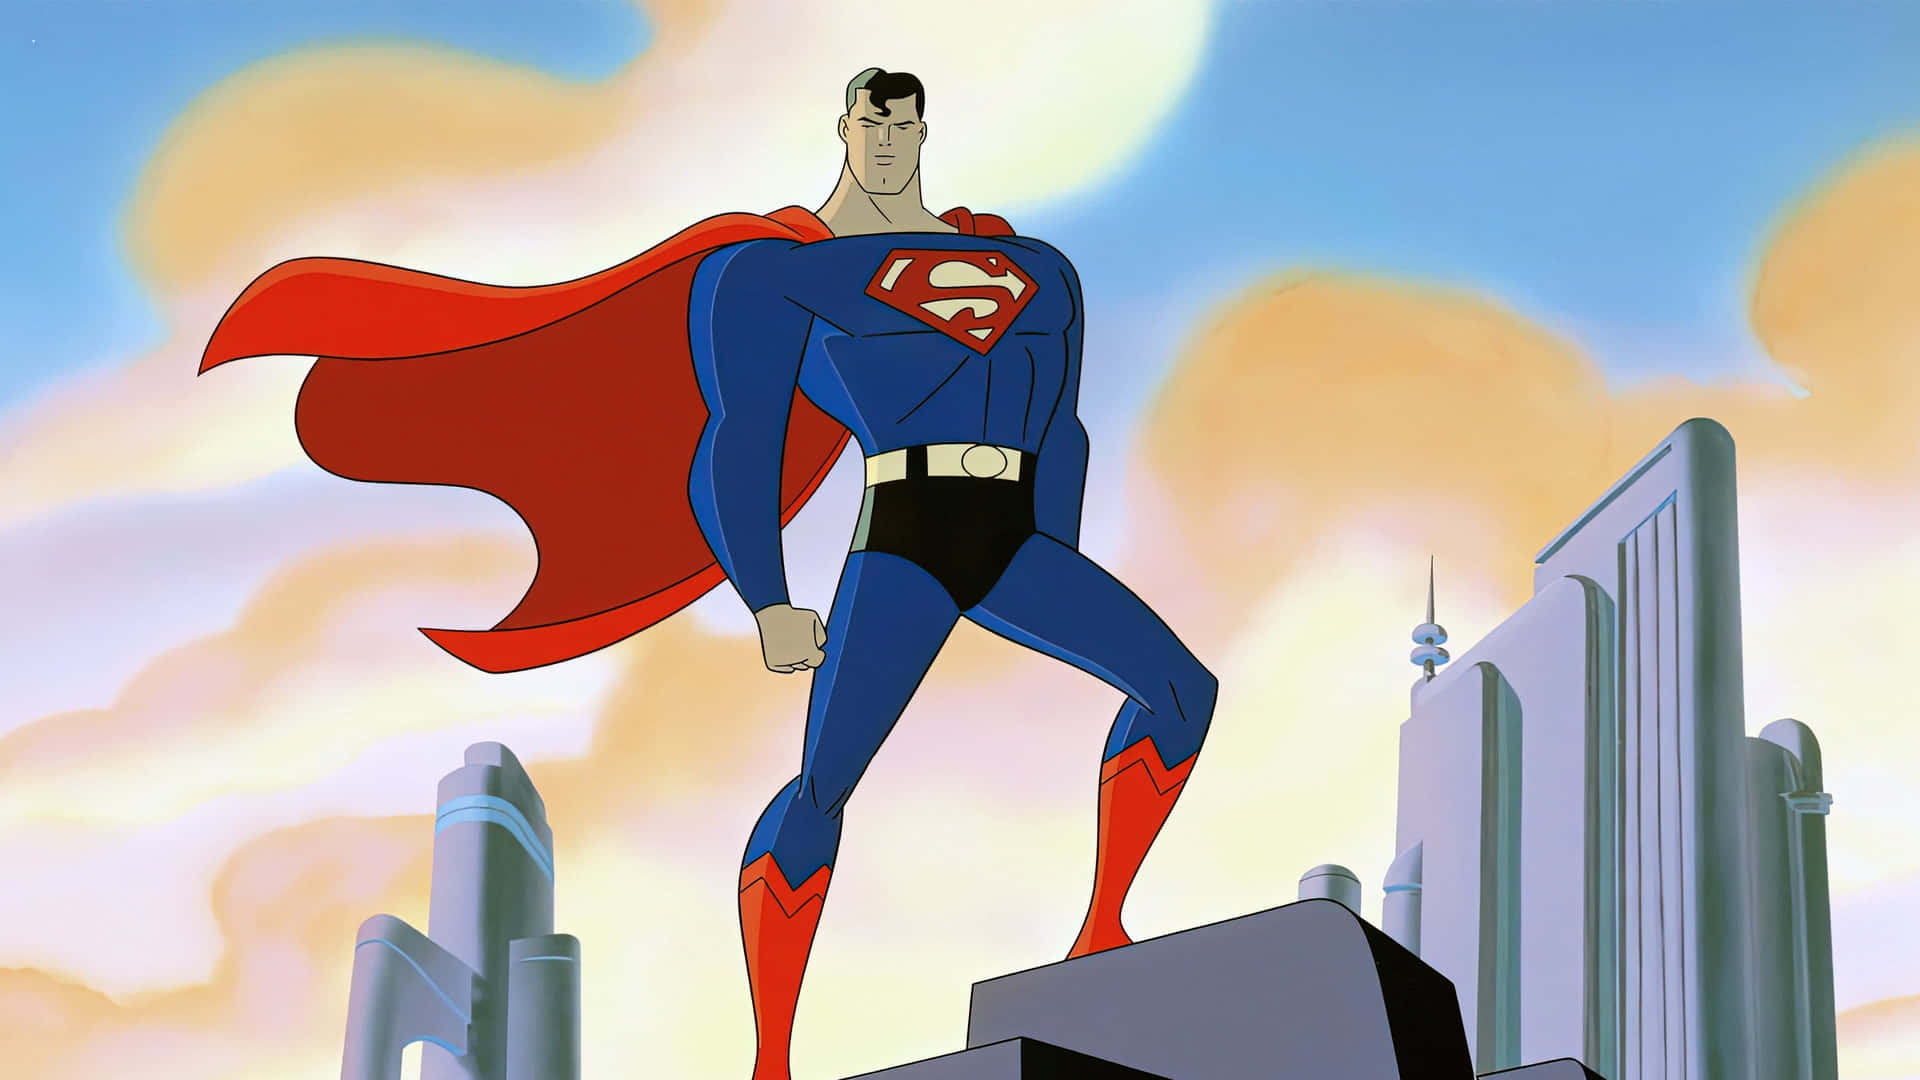 Superman Flying in the Sky with Metropolis in the Background Wallpaper